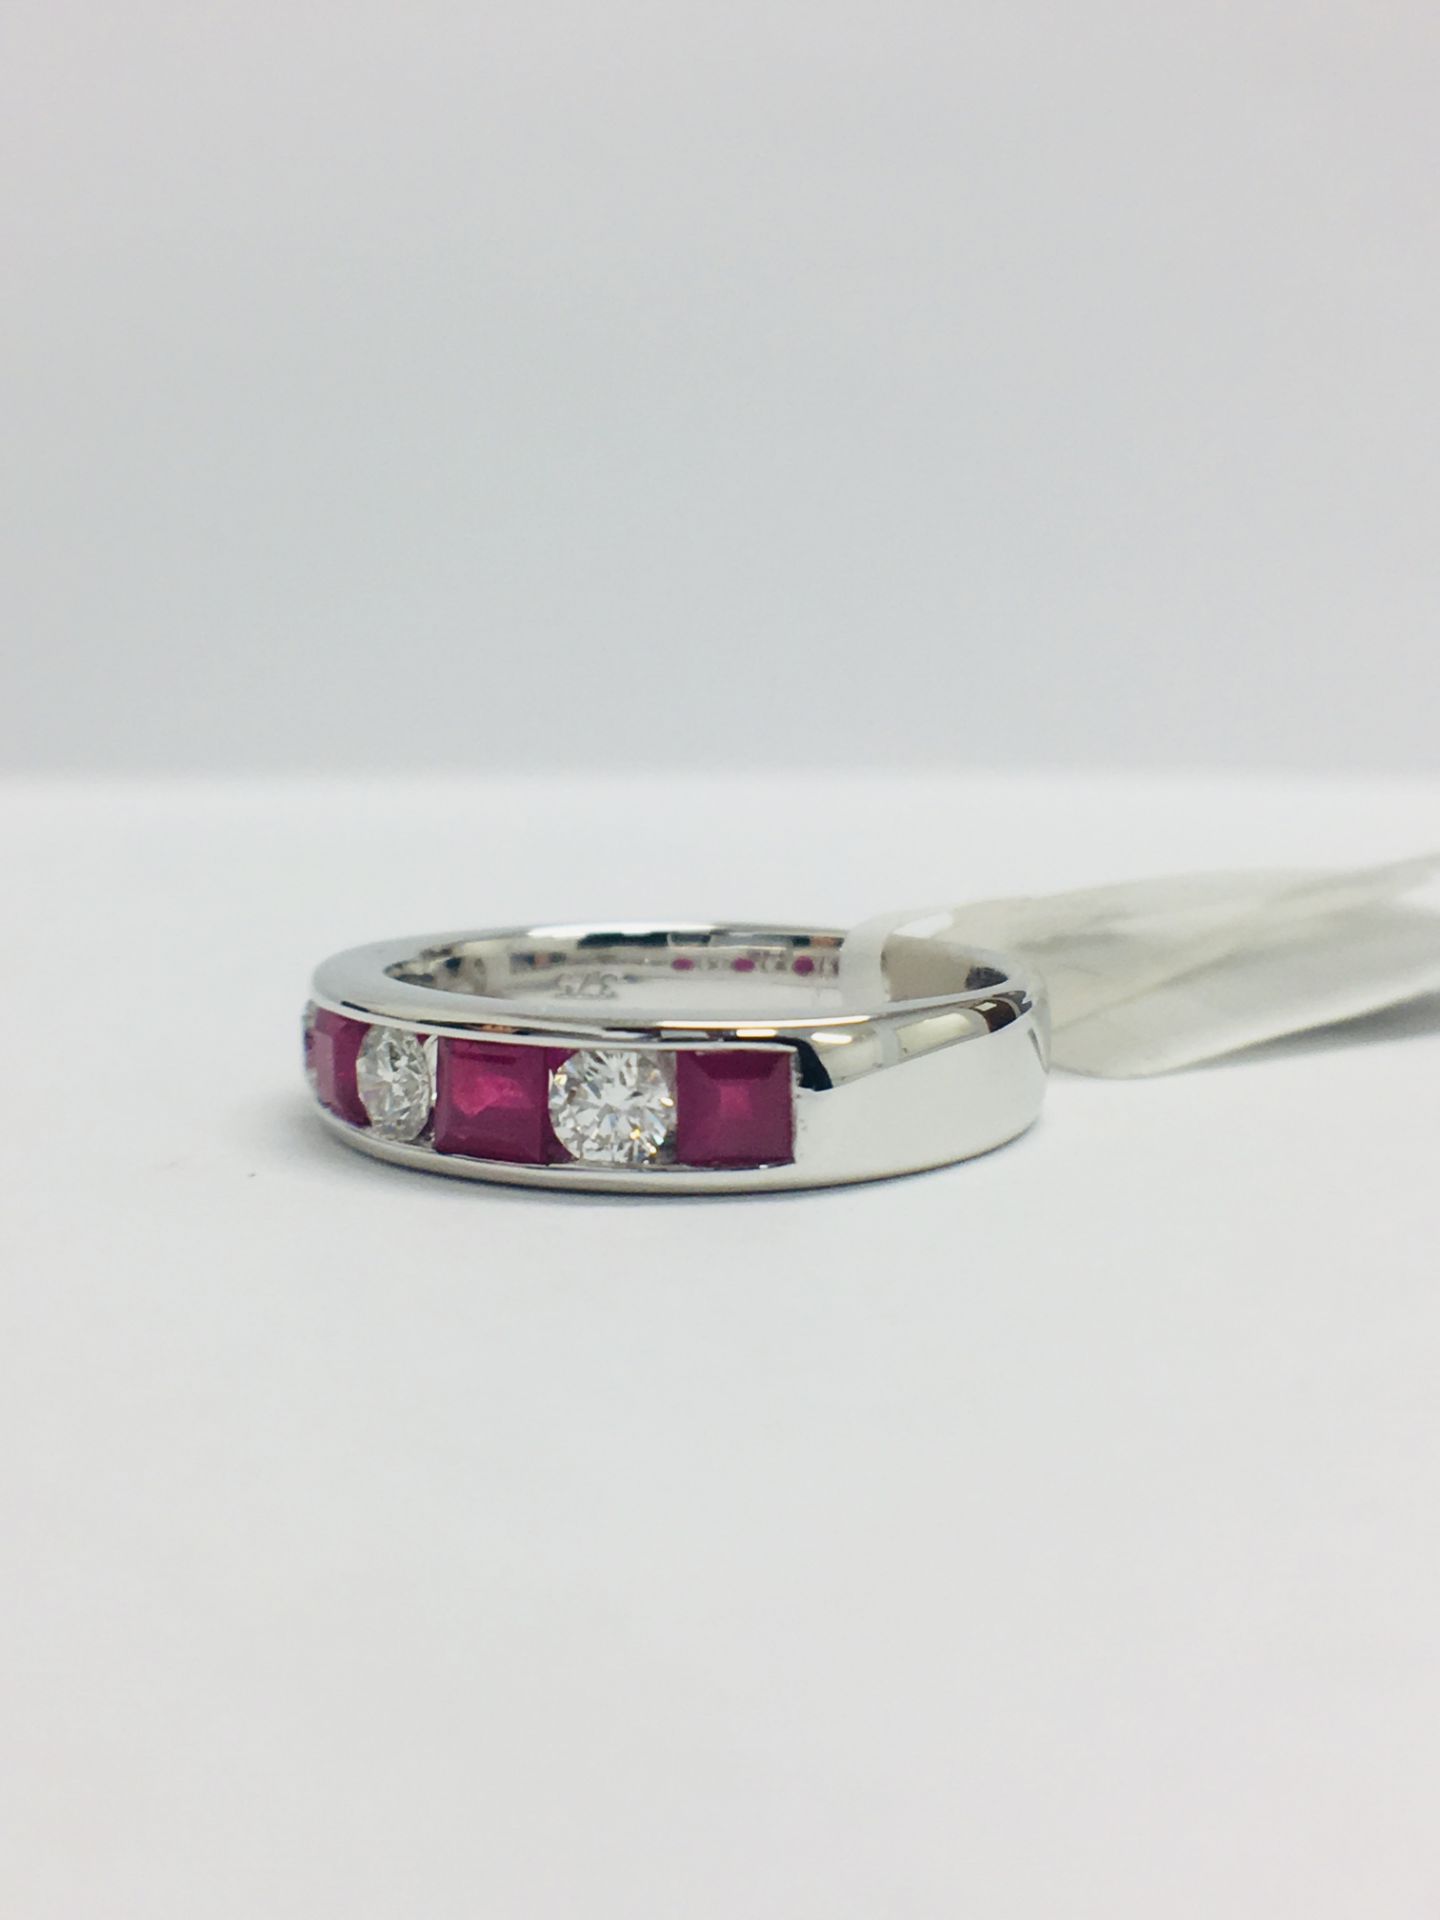 9ct White Gold Ruby Diamond Channel Set Ring - Image 4 of 9